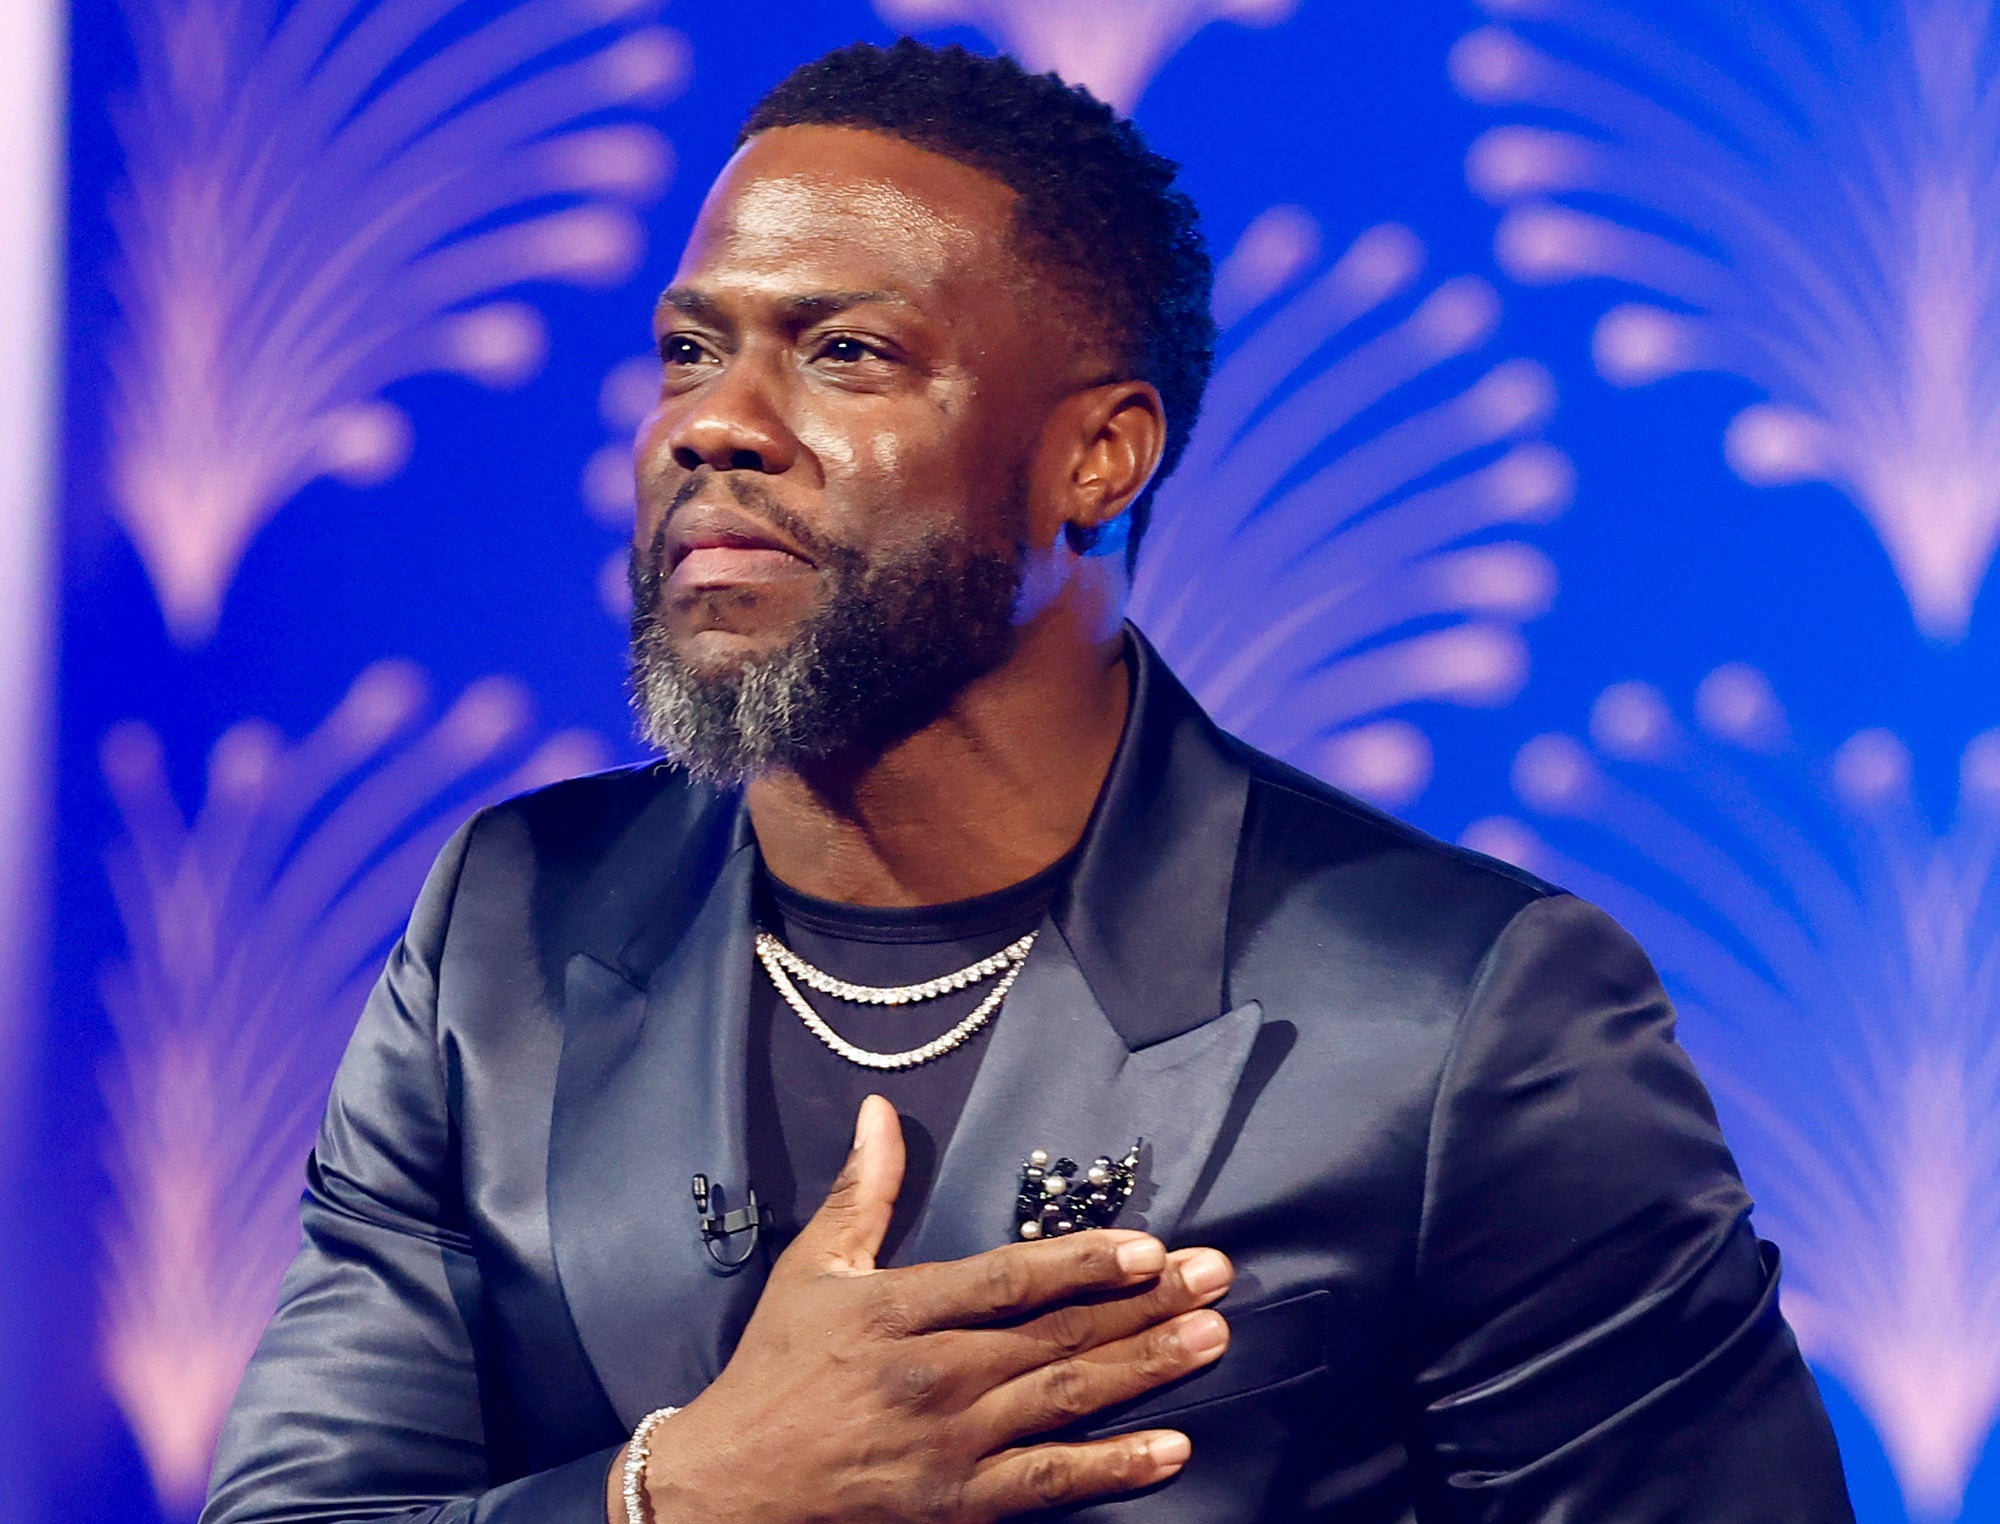 Kevin Hart's Mark Twain Prize Gala Was A Star-Studded Salute To His Comedic Genius